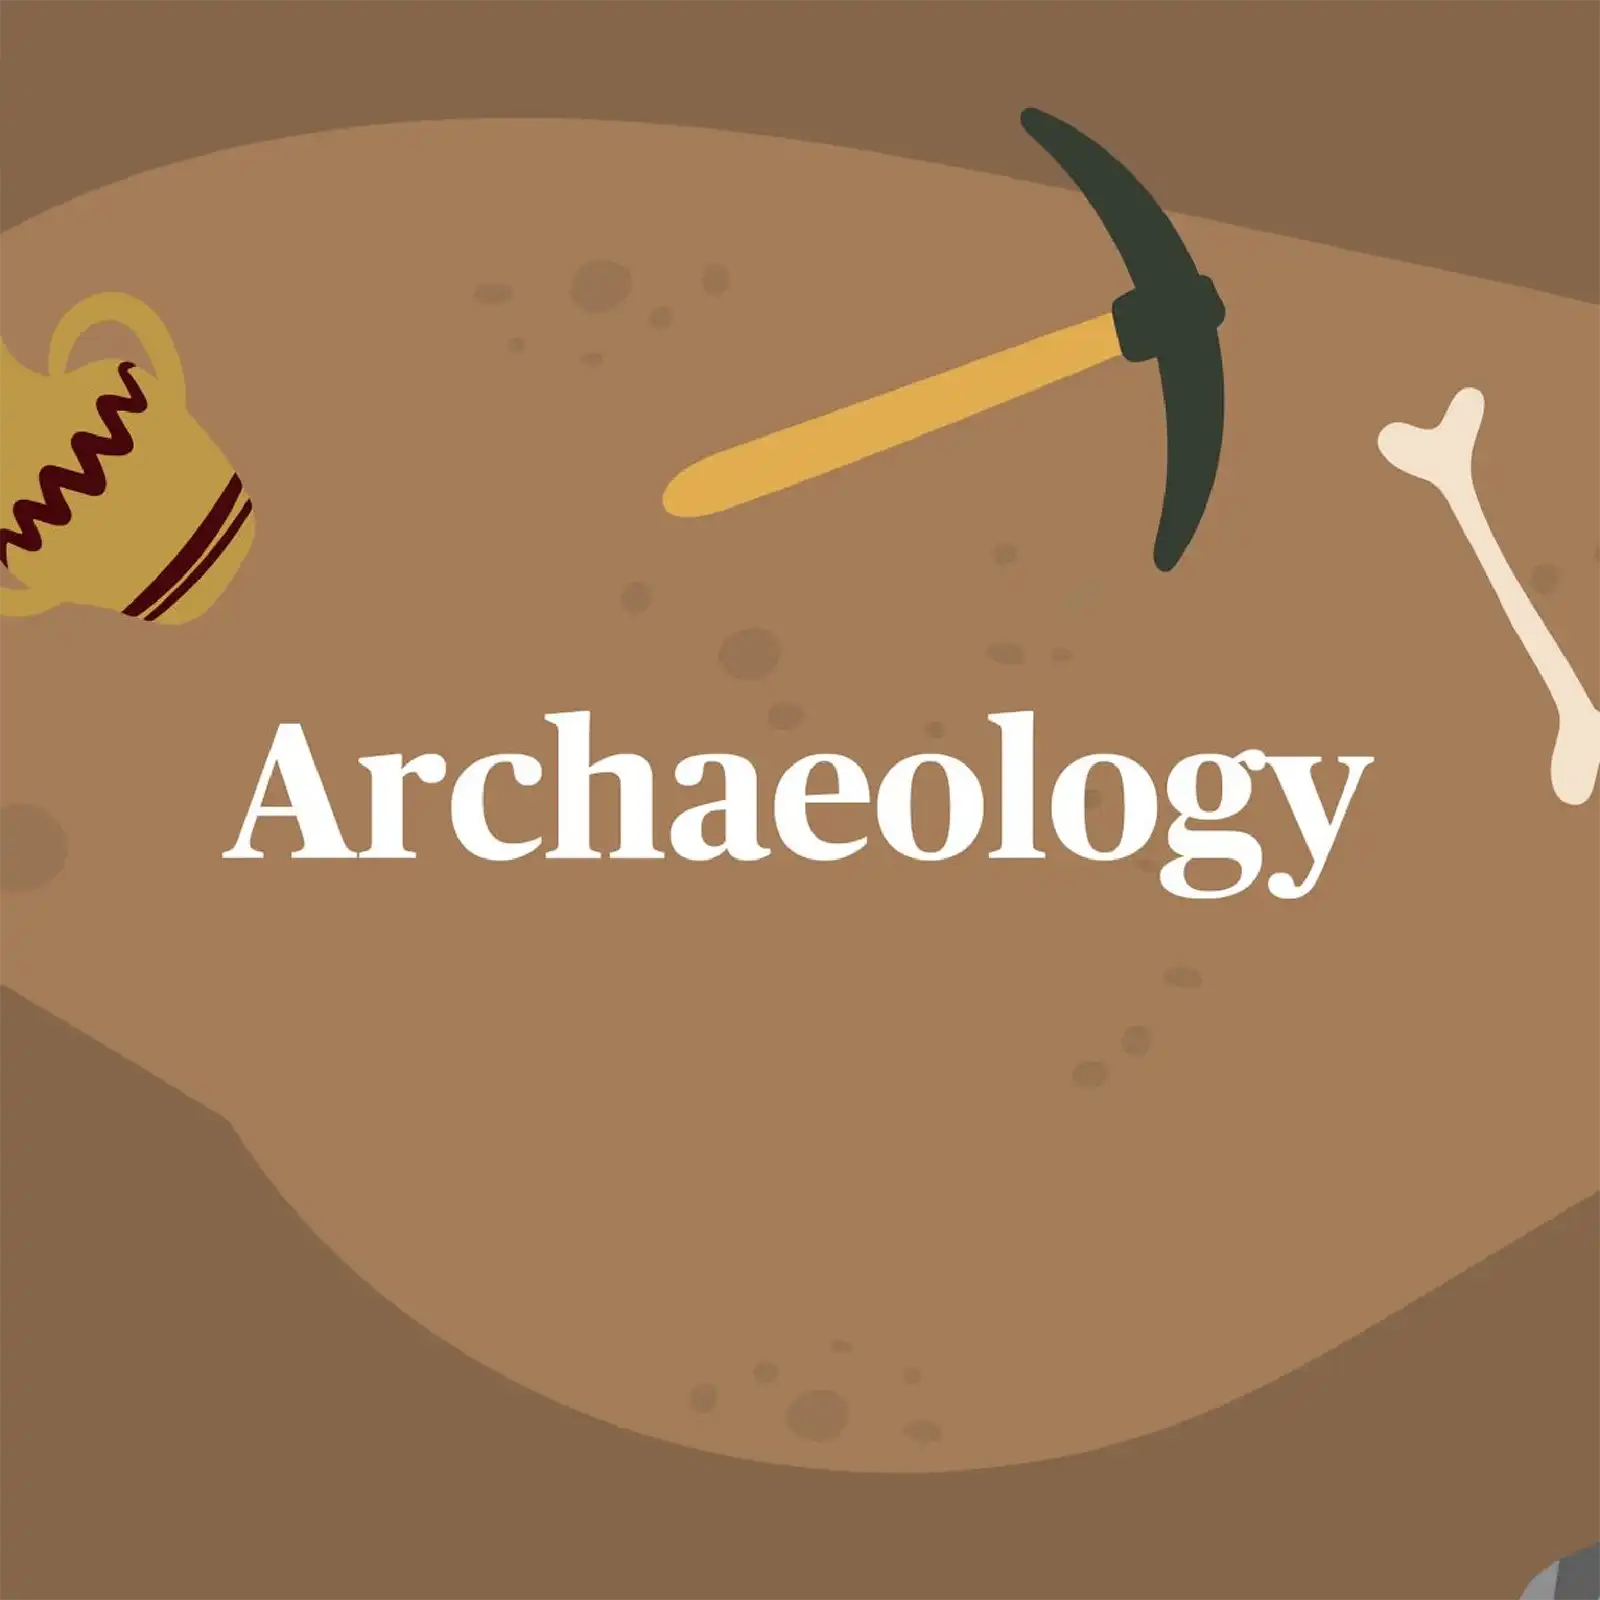 Illustration of an archaeological trench with pick, bone and ceramic pot